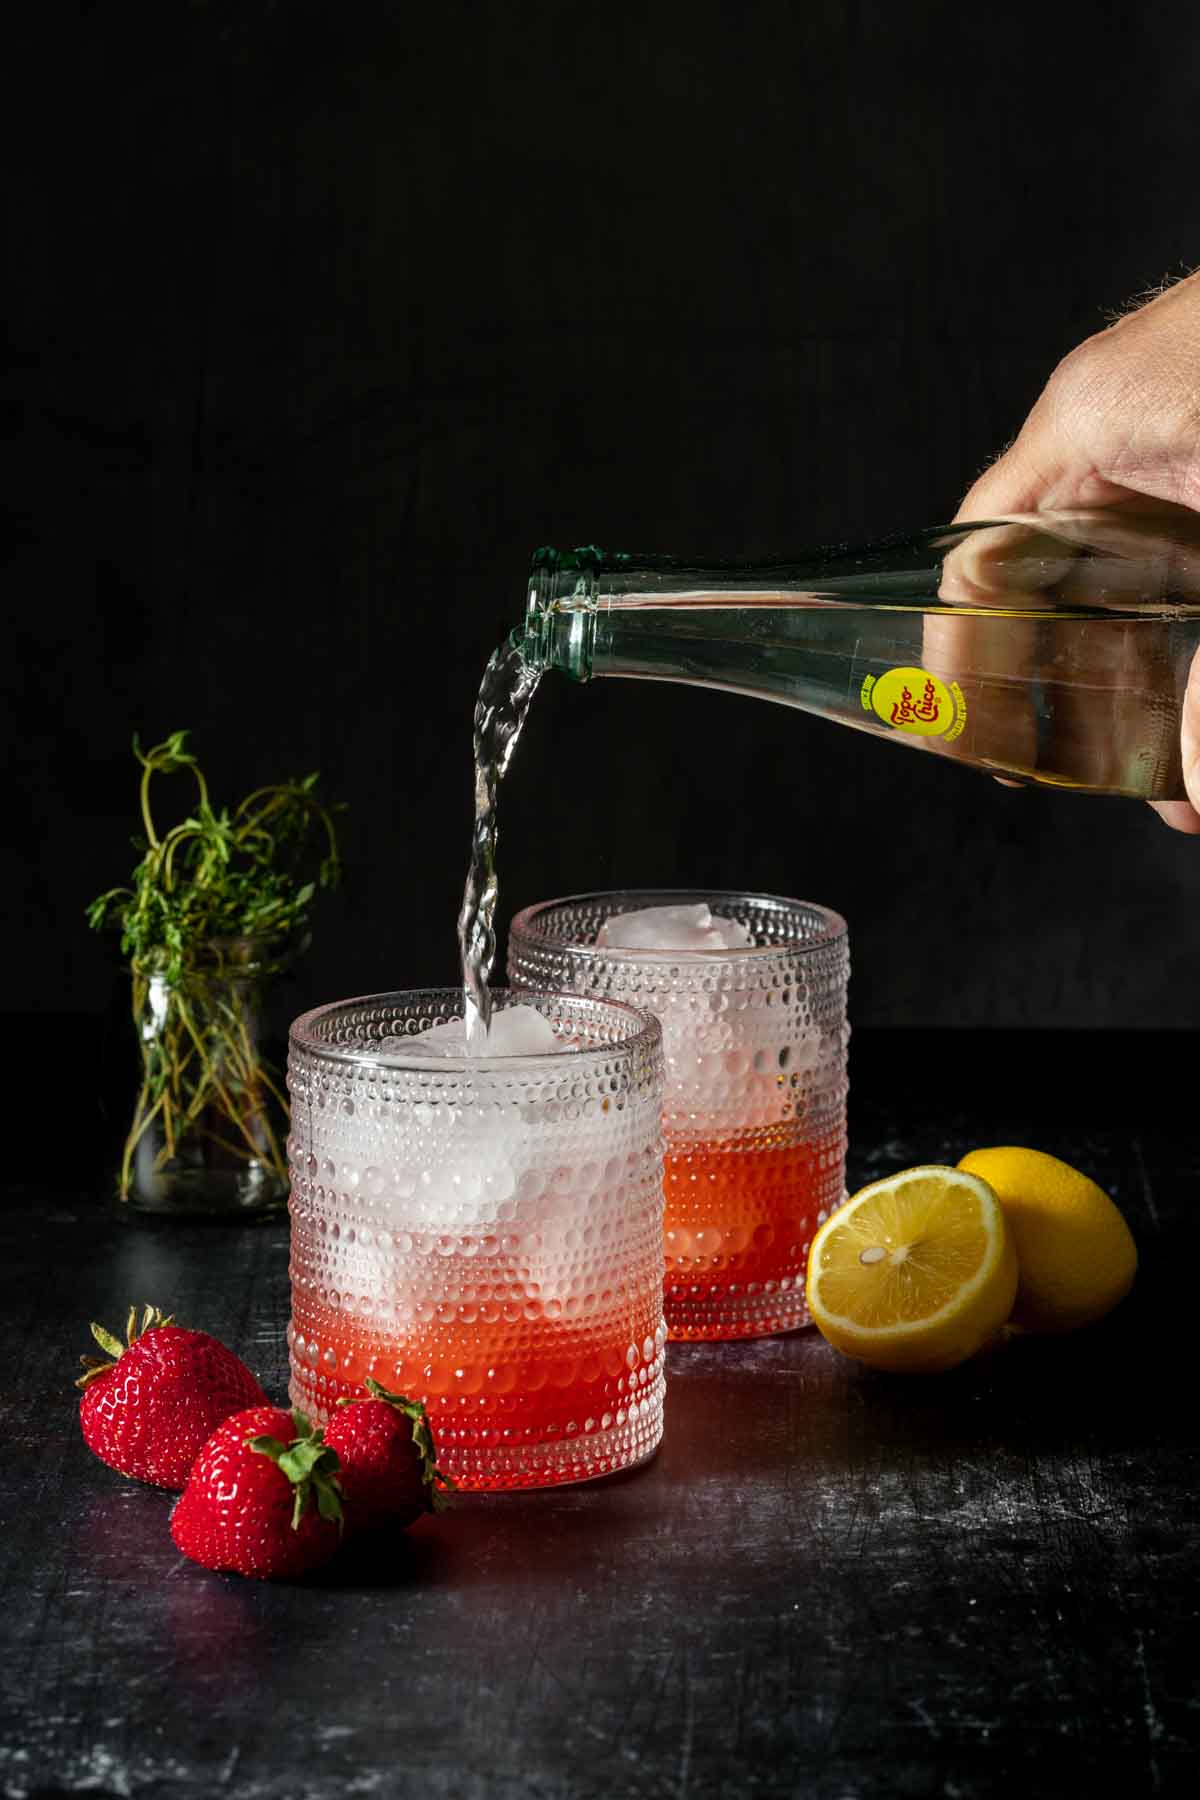 A hand pouring sparkling water from a glass bottle into a cocktail glass with ice and a red liquid.